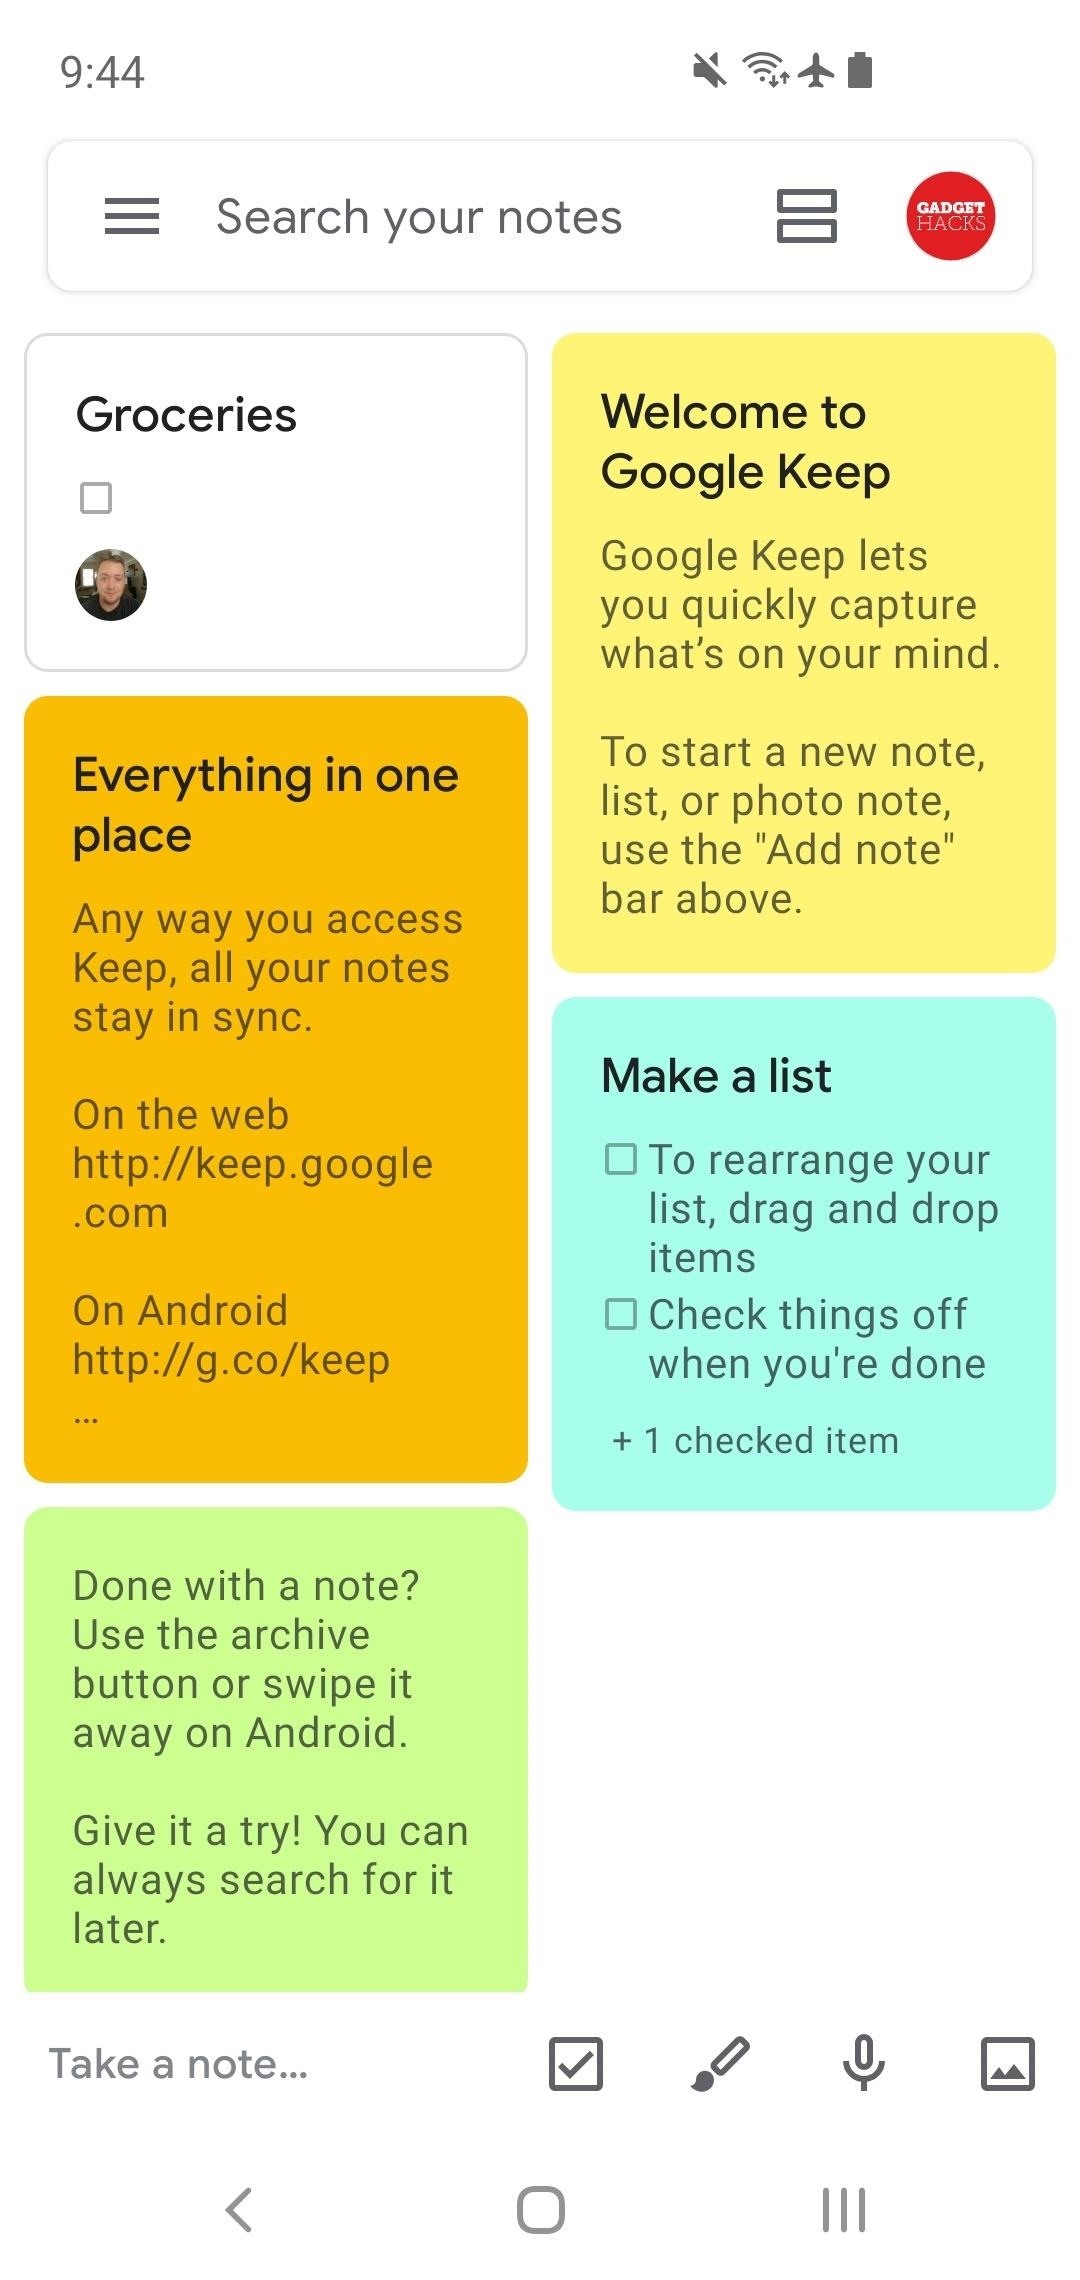 How to Create a Shared Google Keep Checklist for Groceries & Household Chores